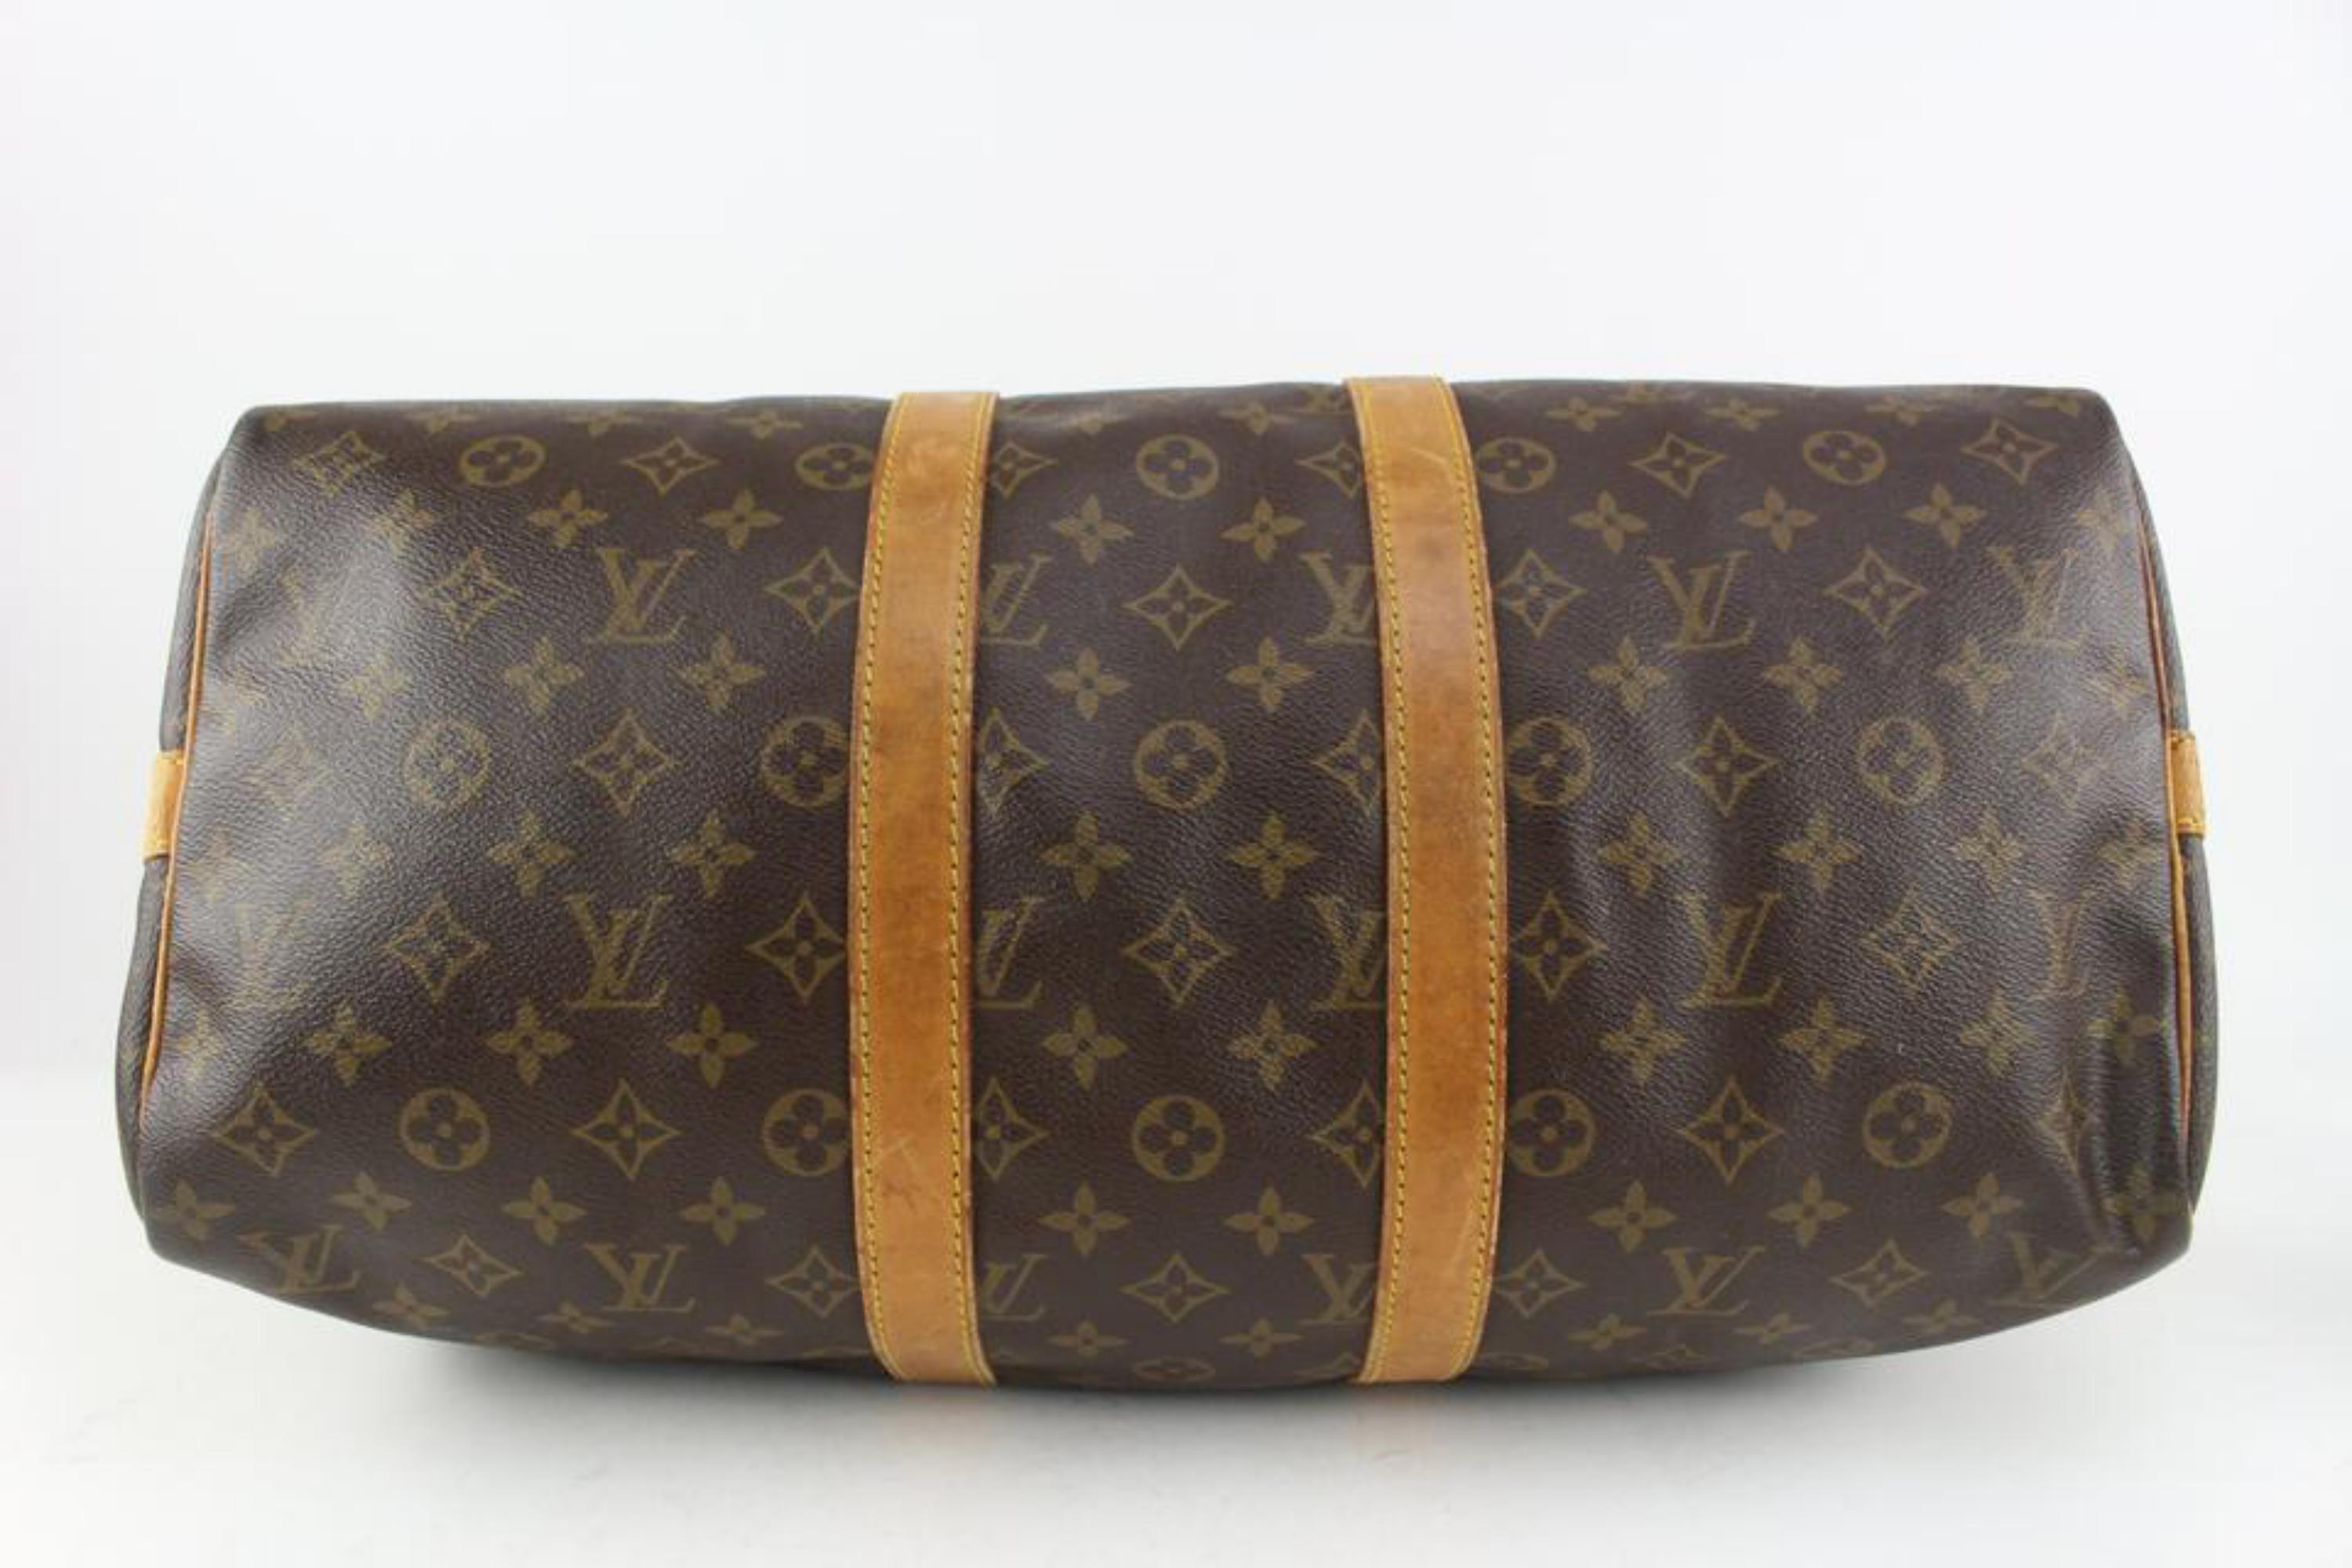 Louis Vuitton Monogram Keepall Bandouliere 45 Duffle Bag with Strap 1122lv11 For Sale 3